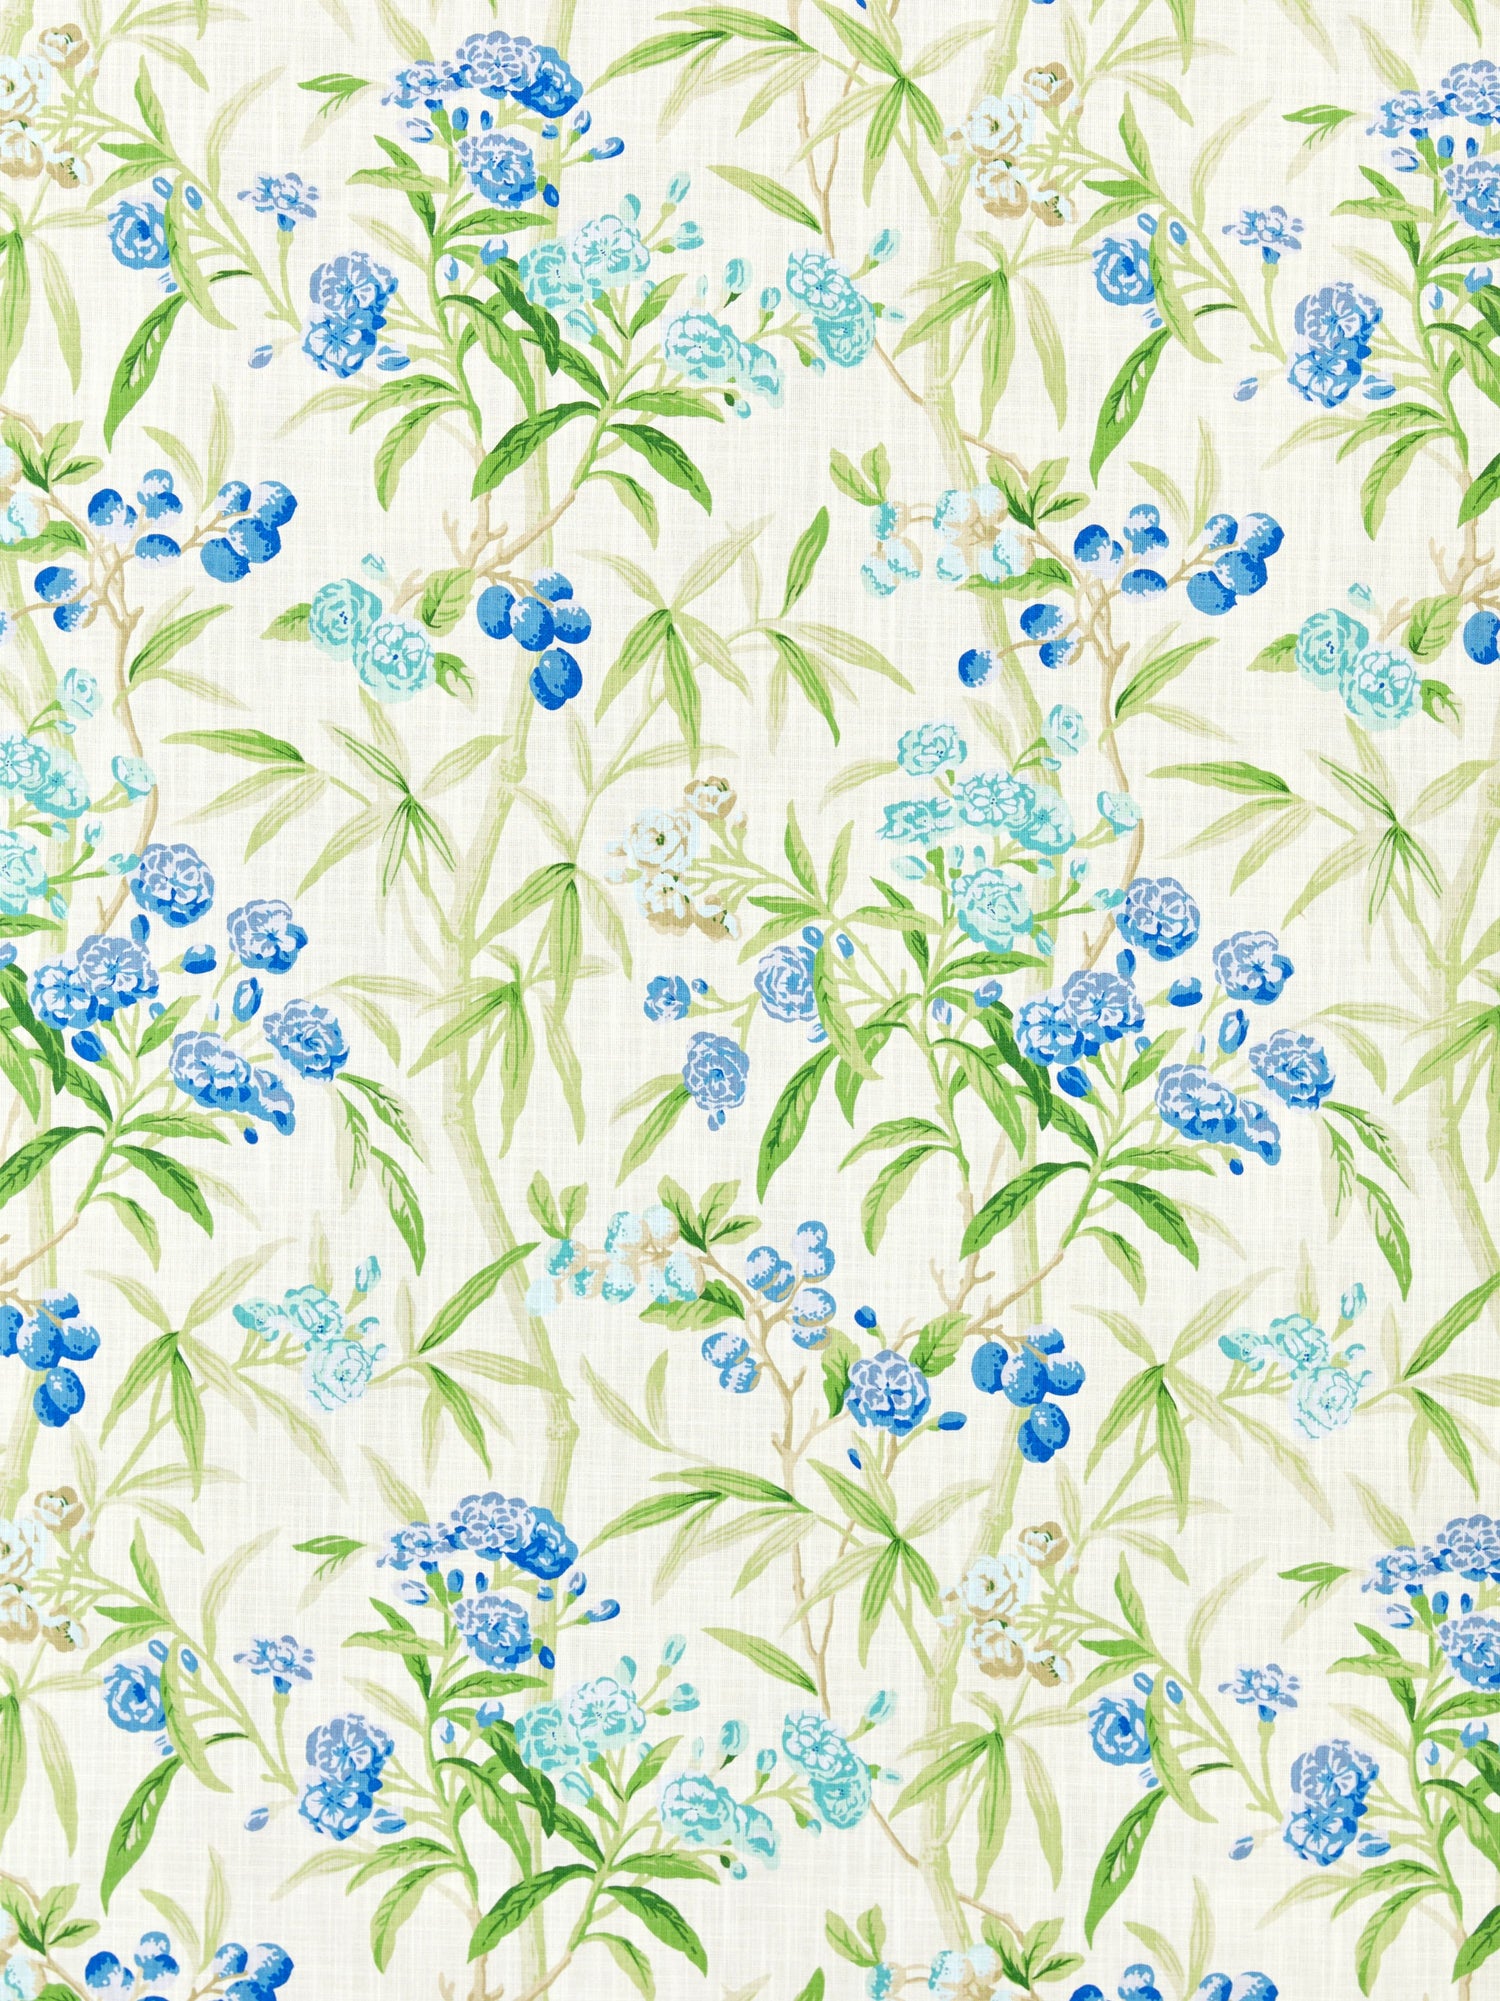 Lanai Outdoor fabric in lagoon color - pattern number SC 000116638 - by Scalamandre in the Scalamandre Fabrics Book 1 collection